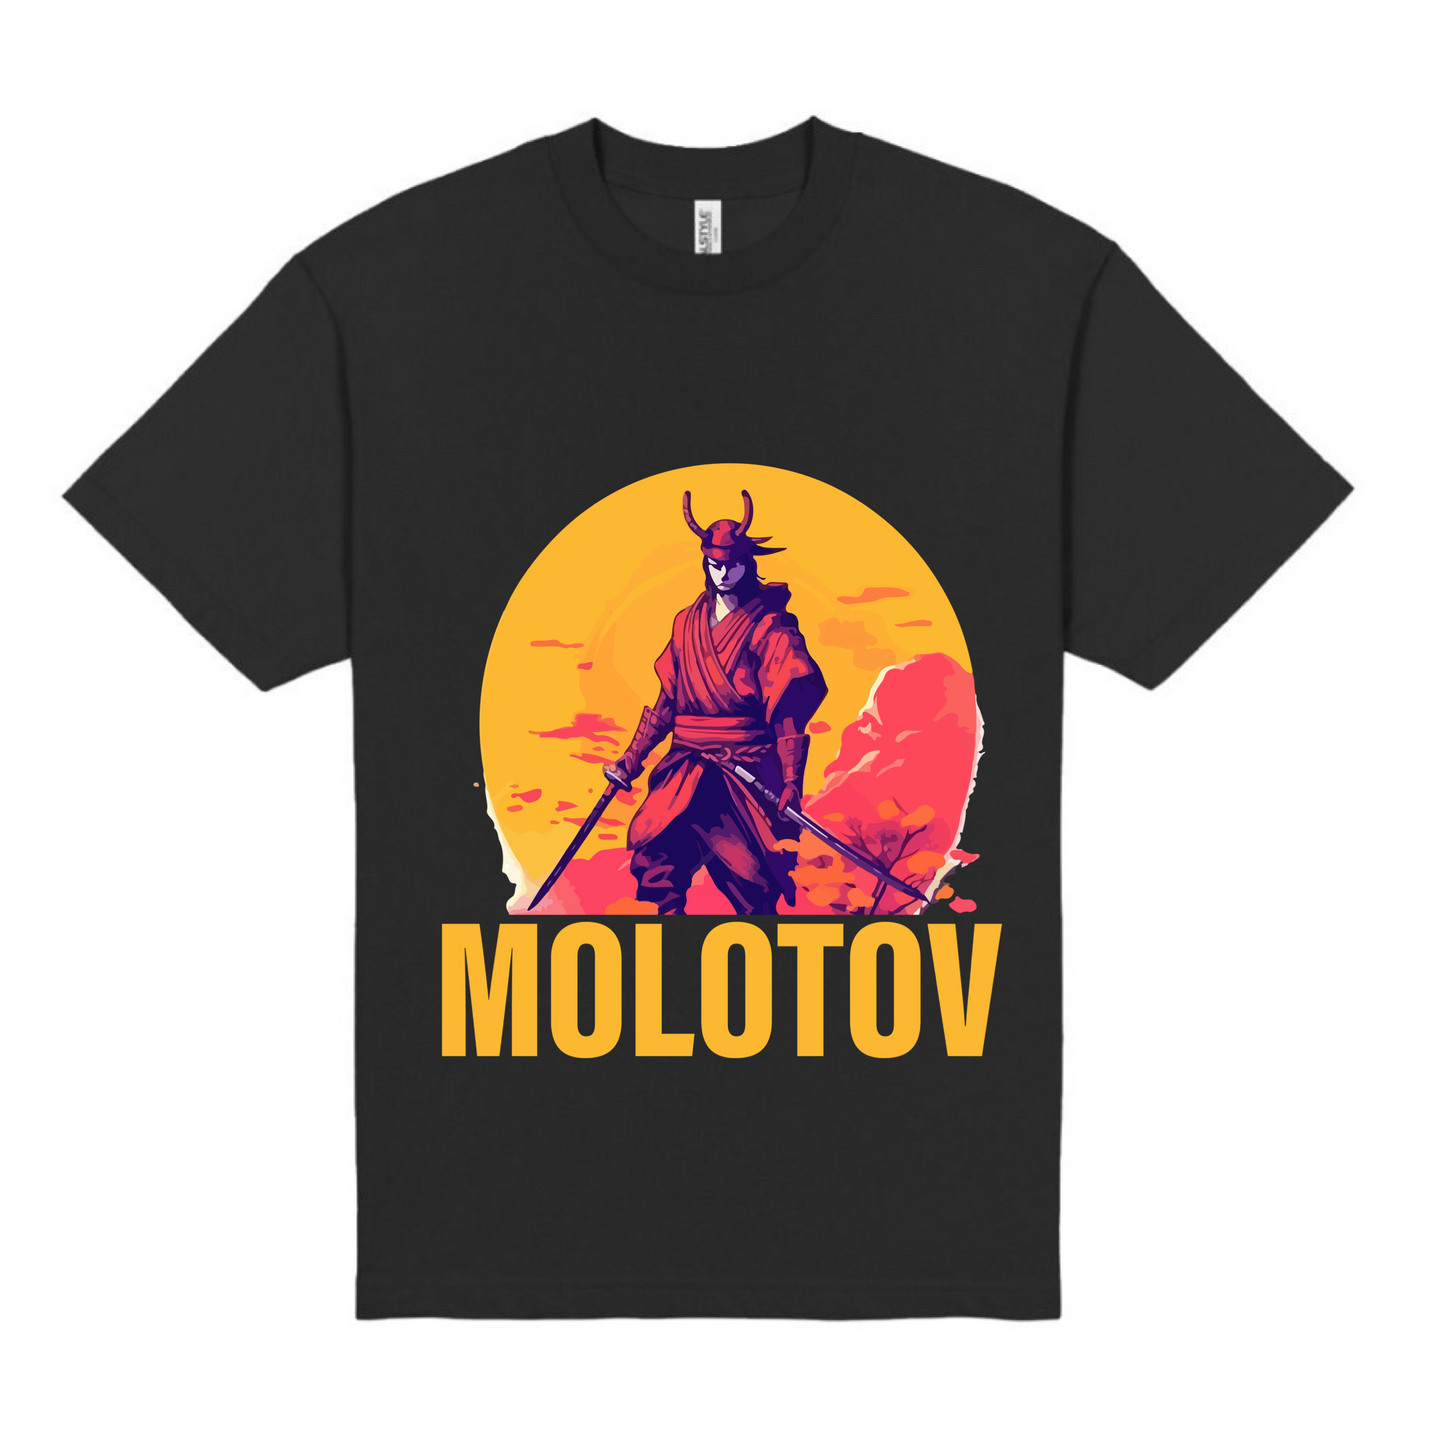 CLP ALMIGHTY PUNCH MOLOTOV BLACK T-SHIRT